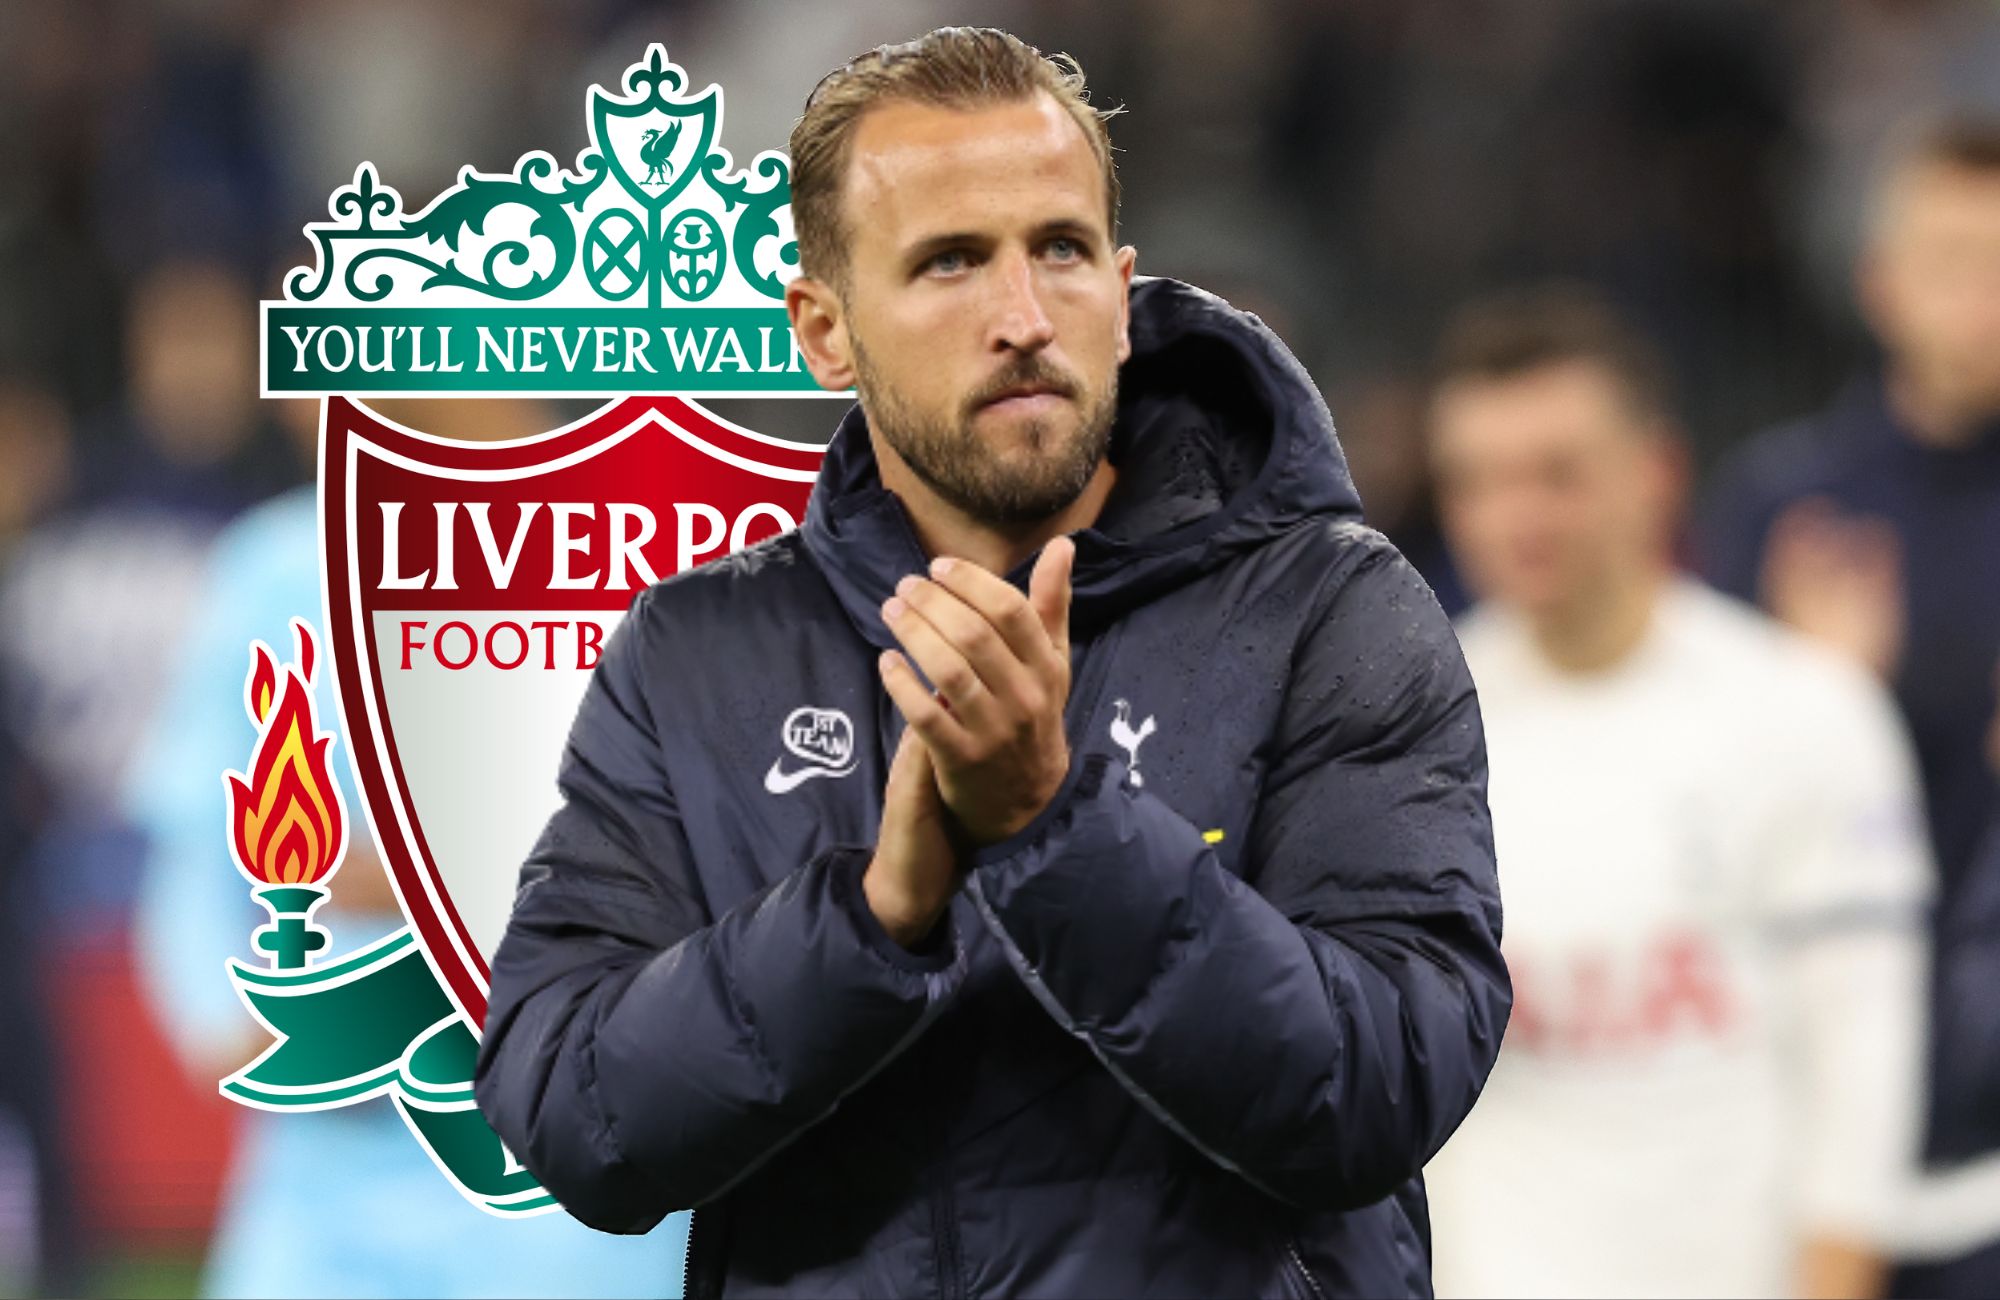 Harry Kane midfield Liverpool\'s saved transfer may have search